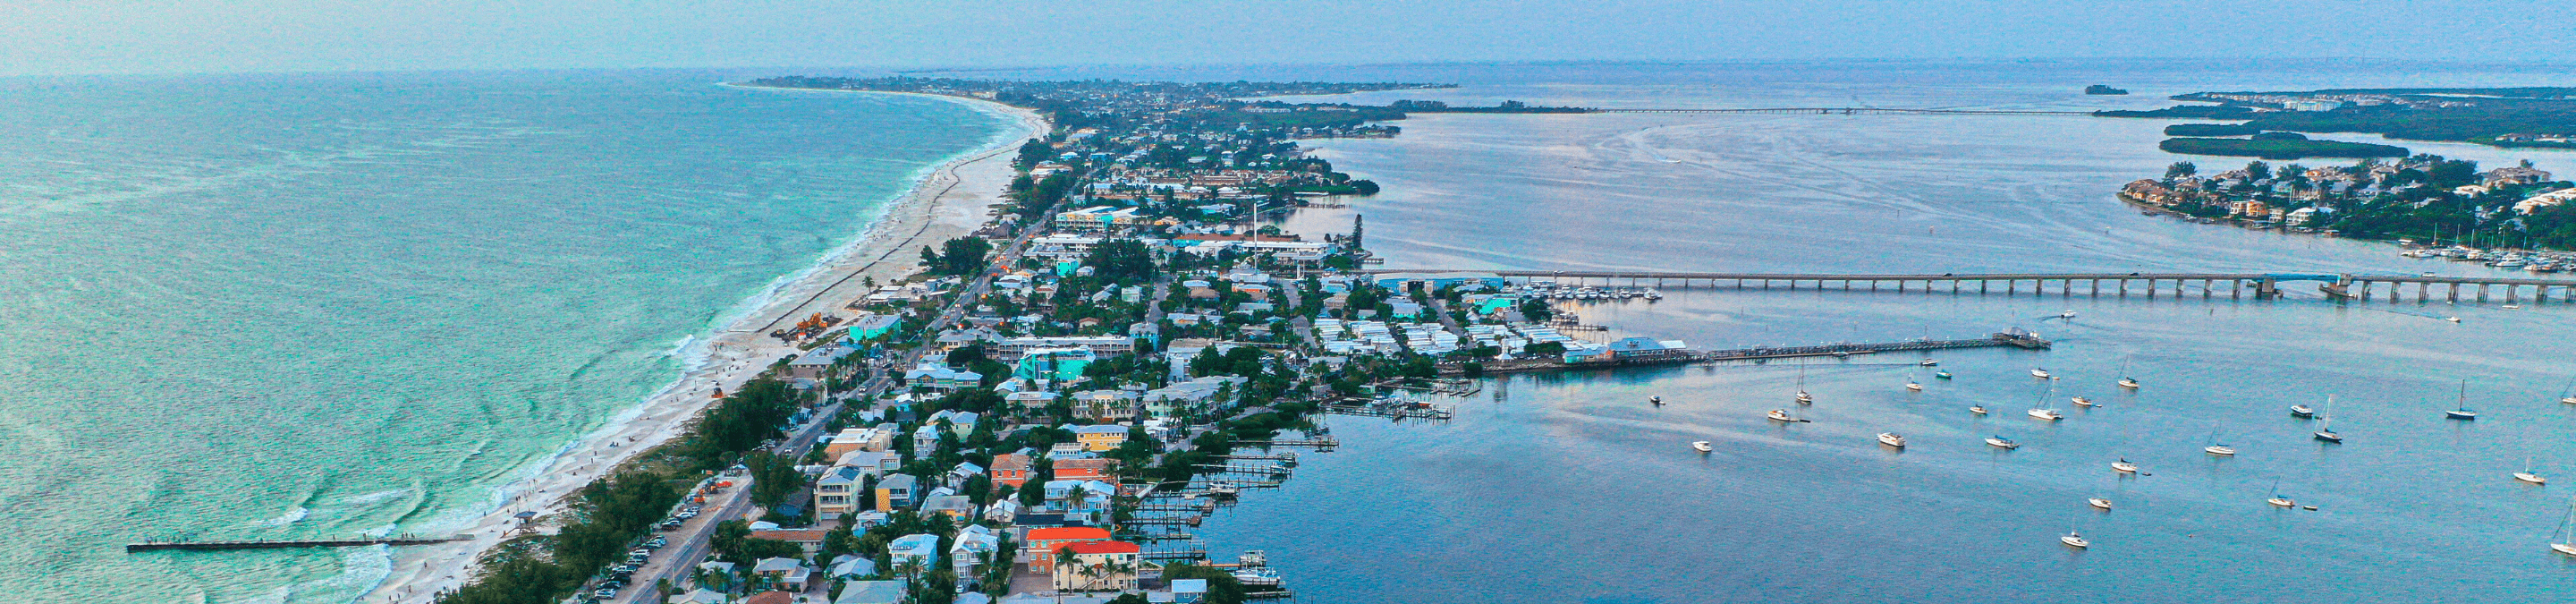 aerial view from drone over Bradenton Beach showing many buildings on the island, the gulf of Mexico on the left and the bay on the right